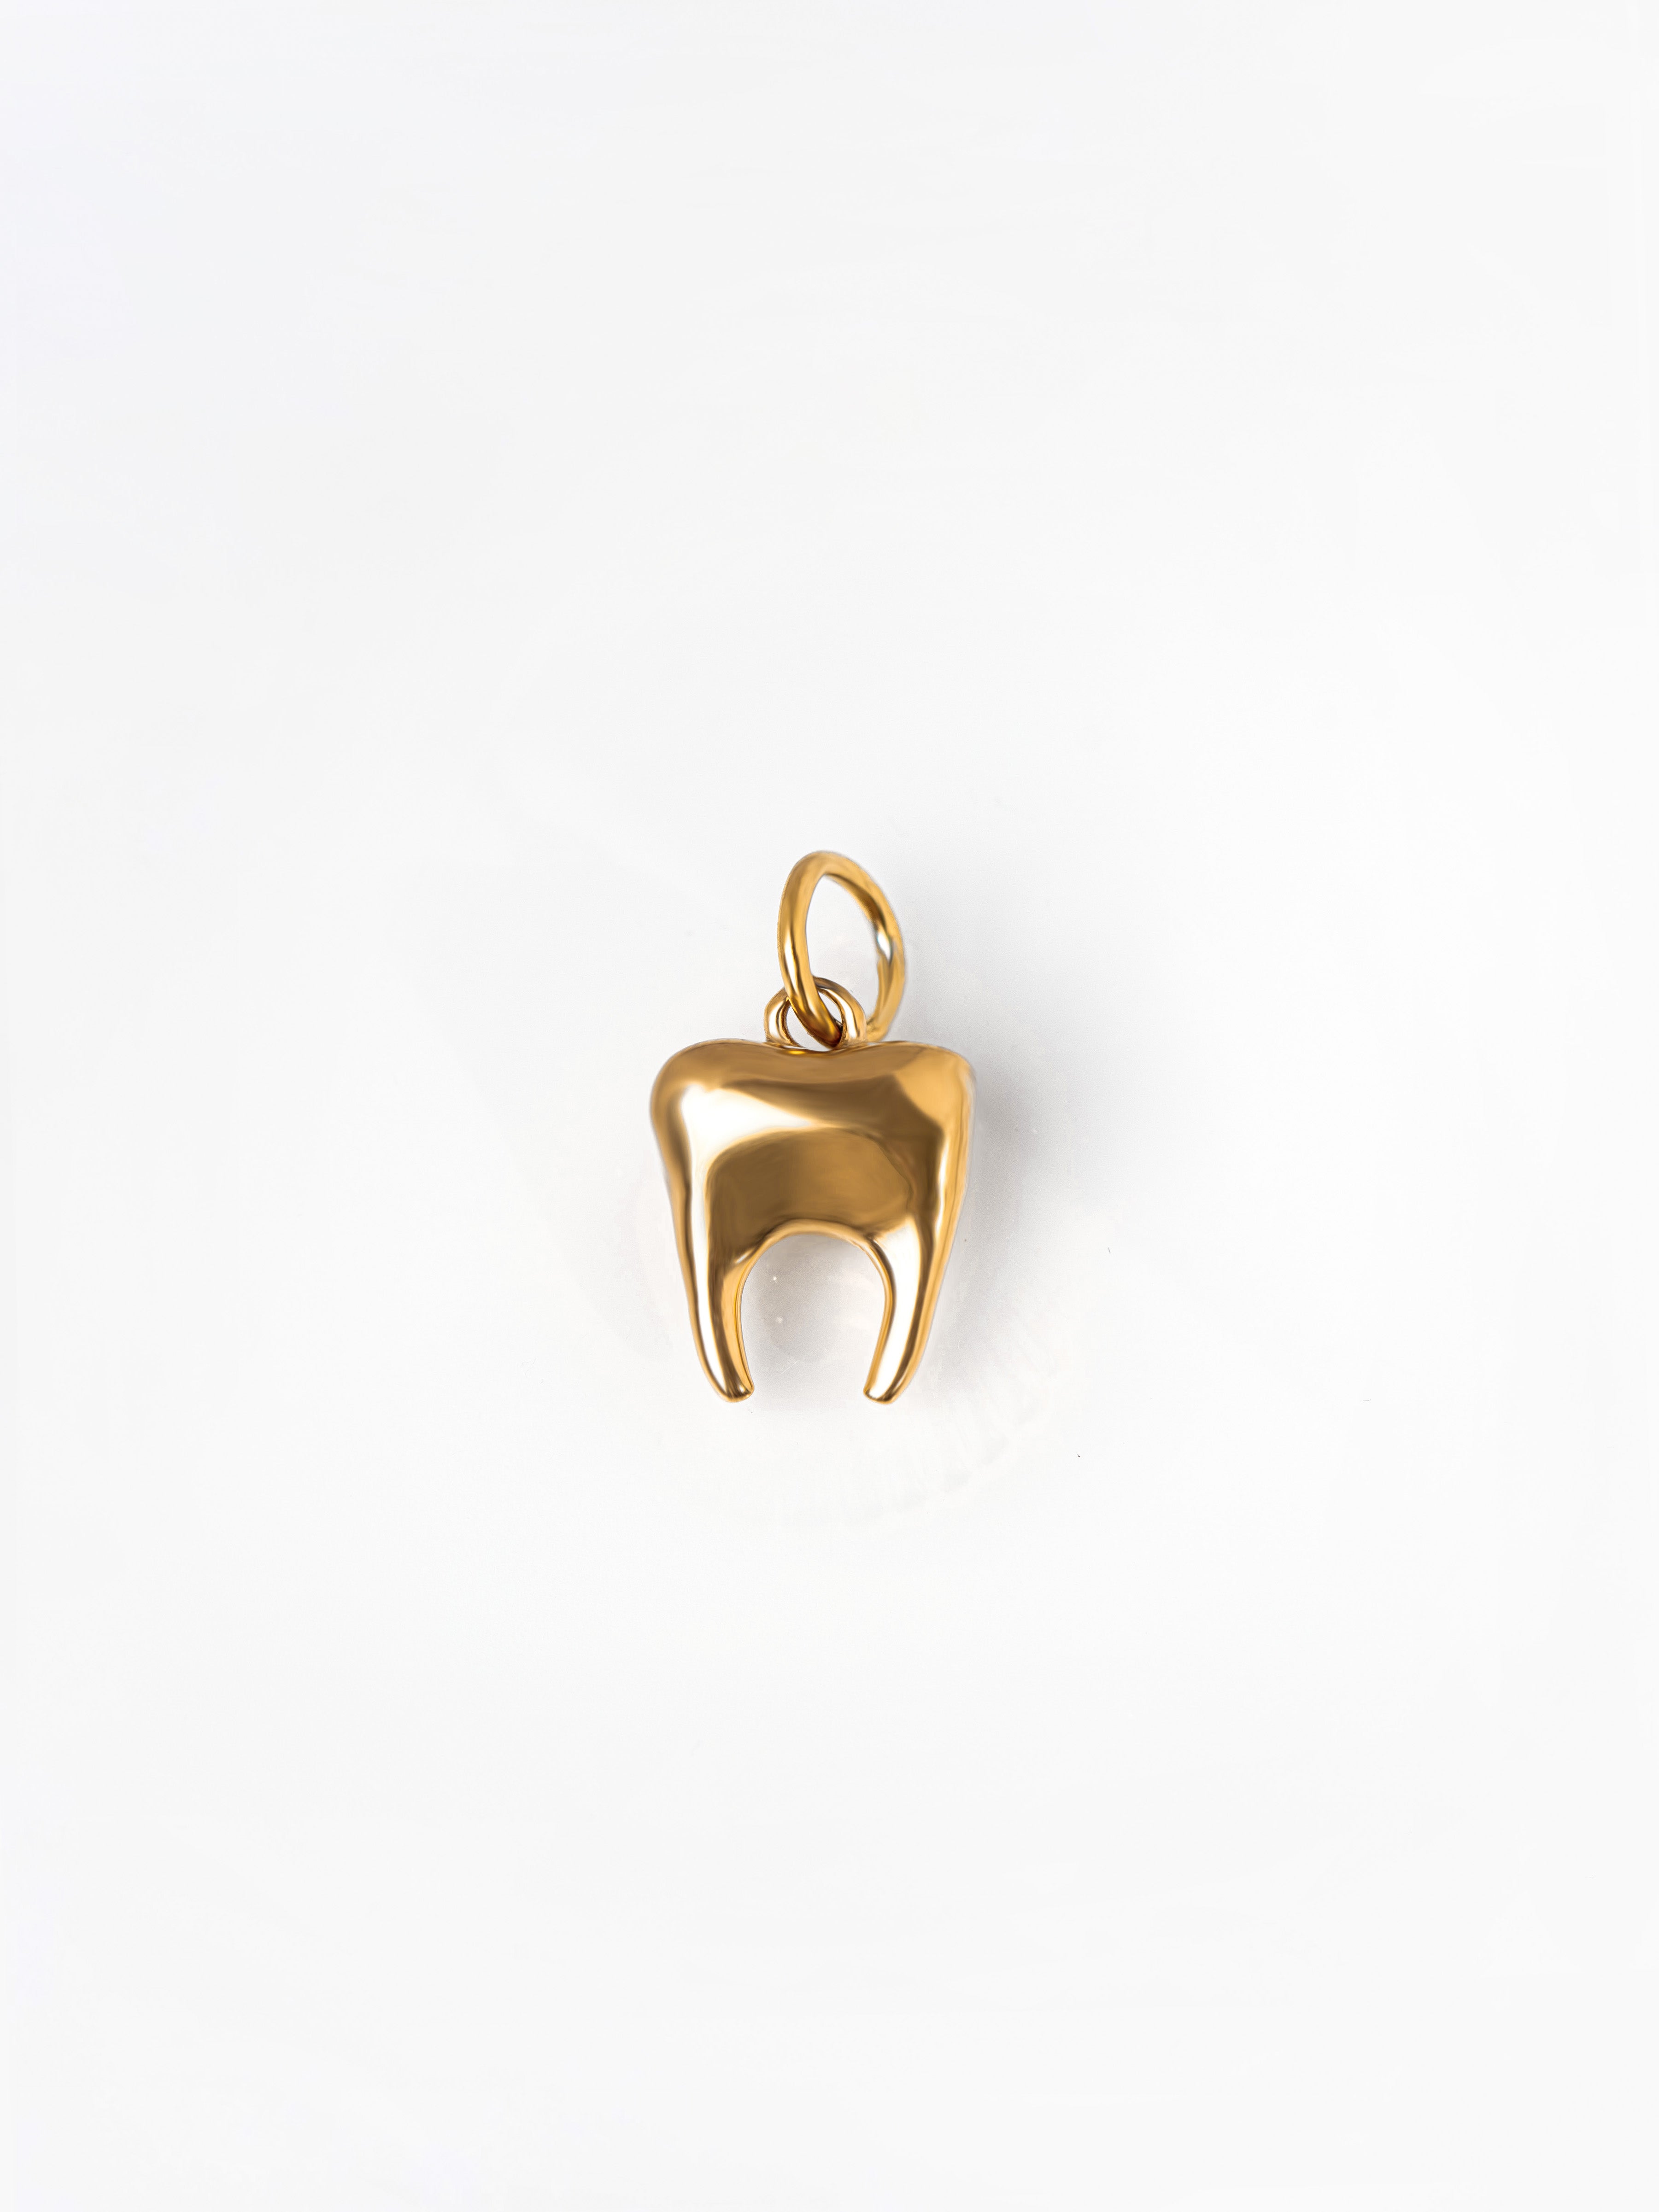 Gold Tooth Pendant / Charm